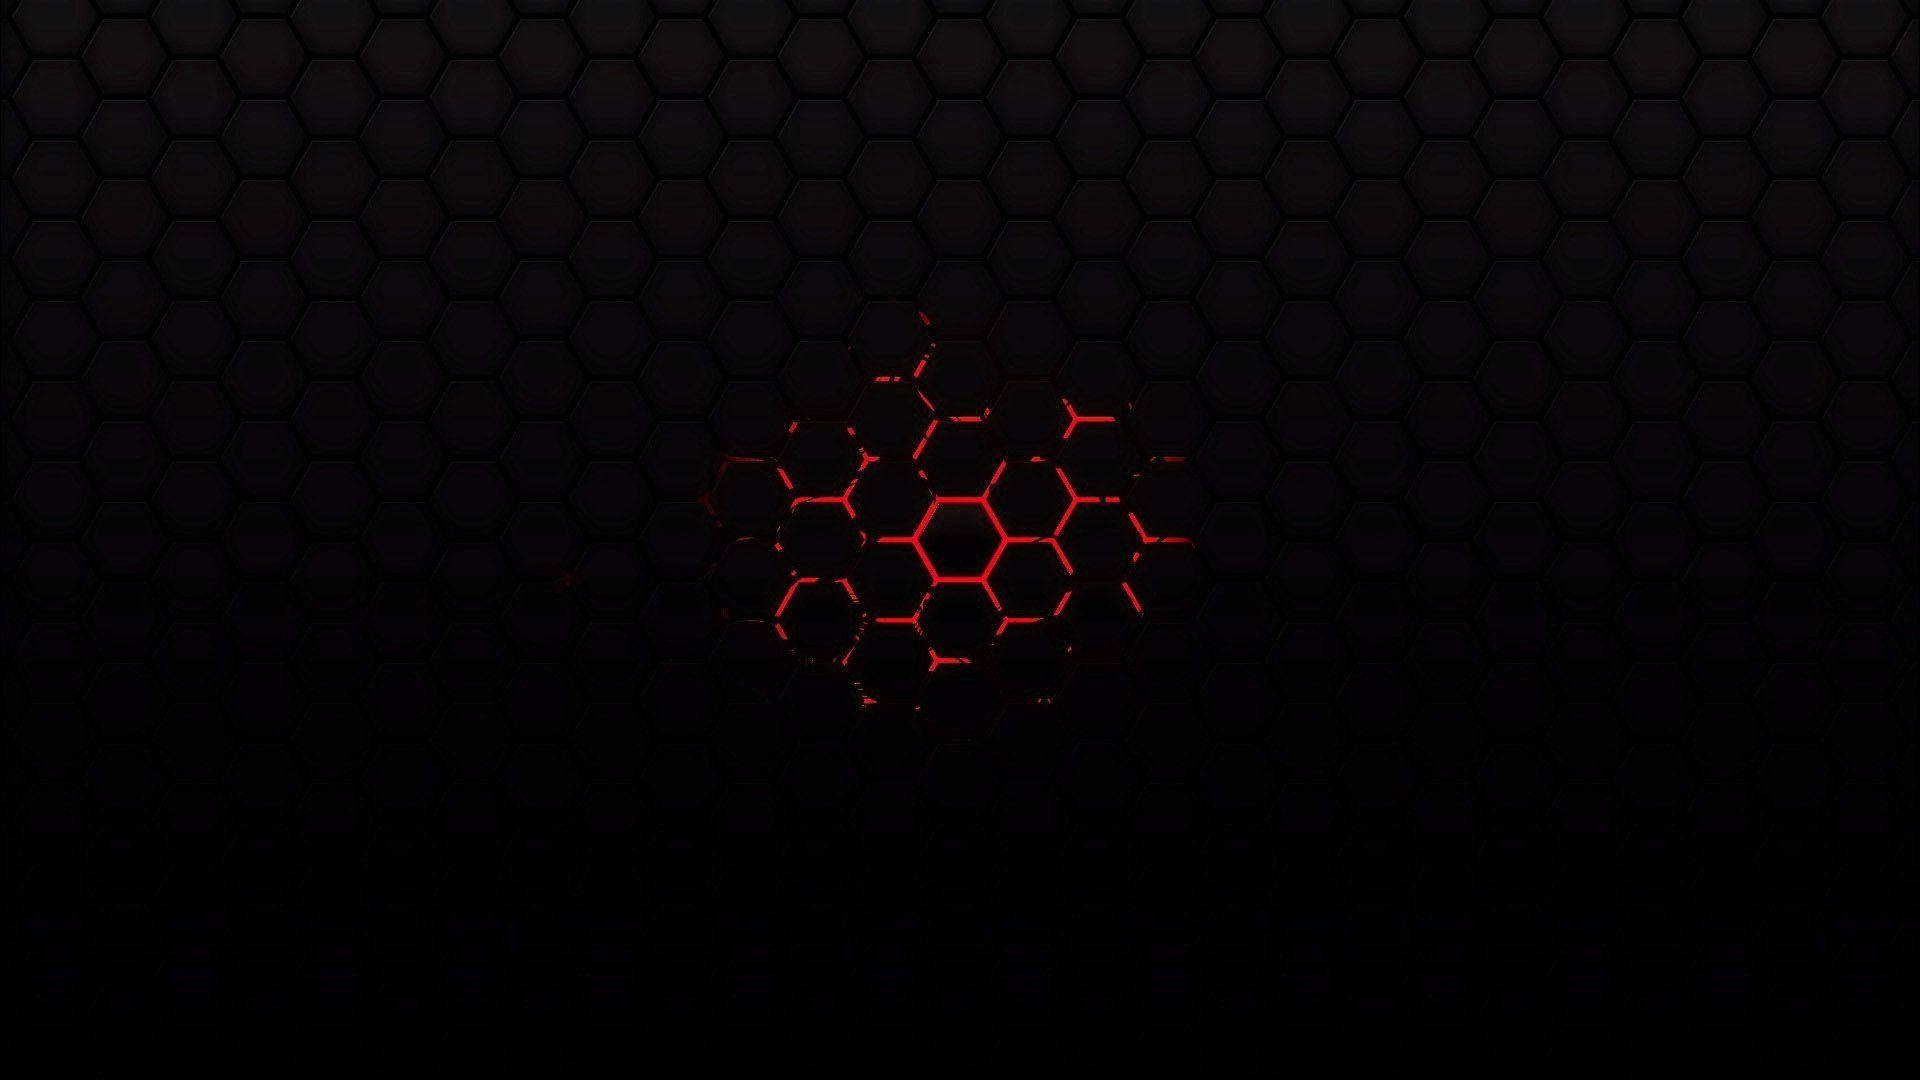 Hexagon Pattern In Red And Black Desktop Background